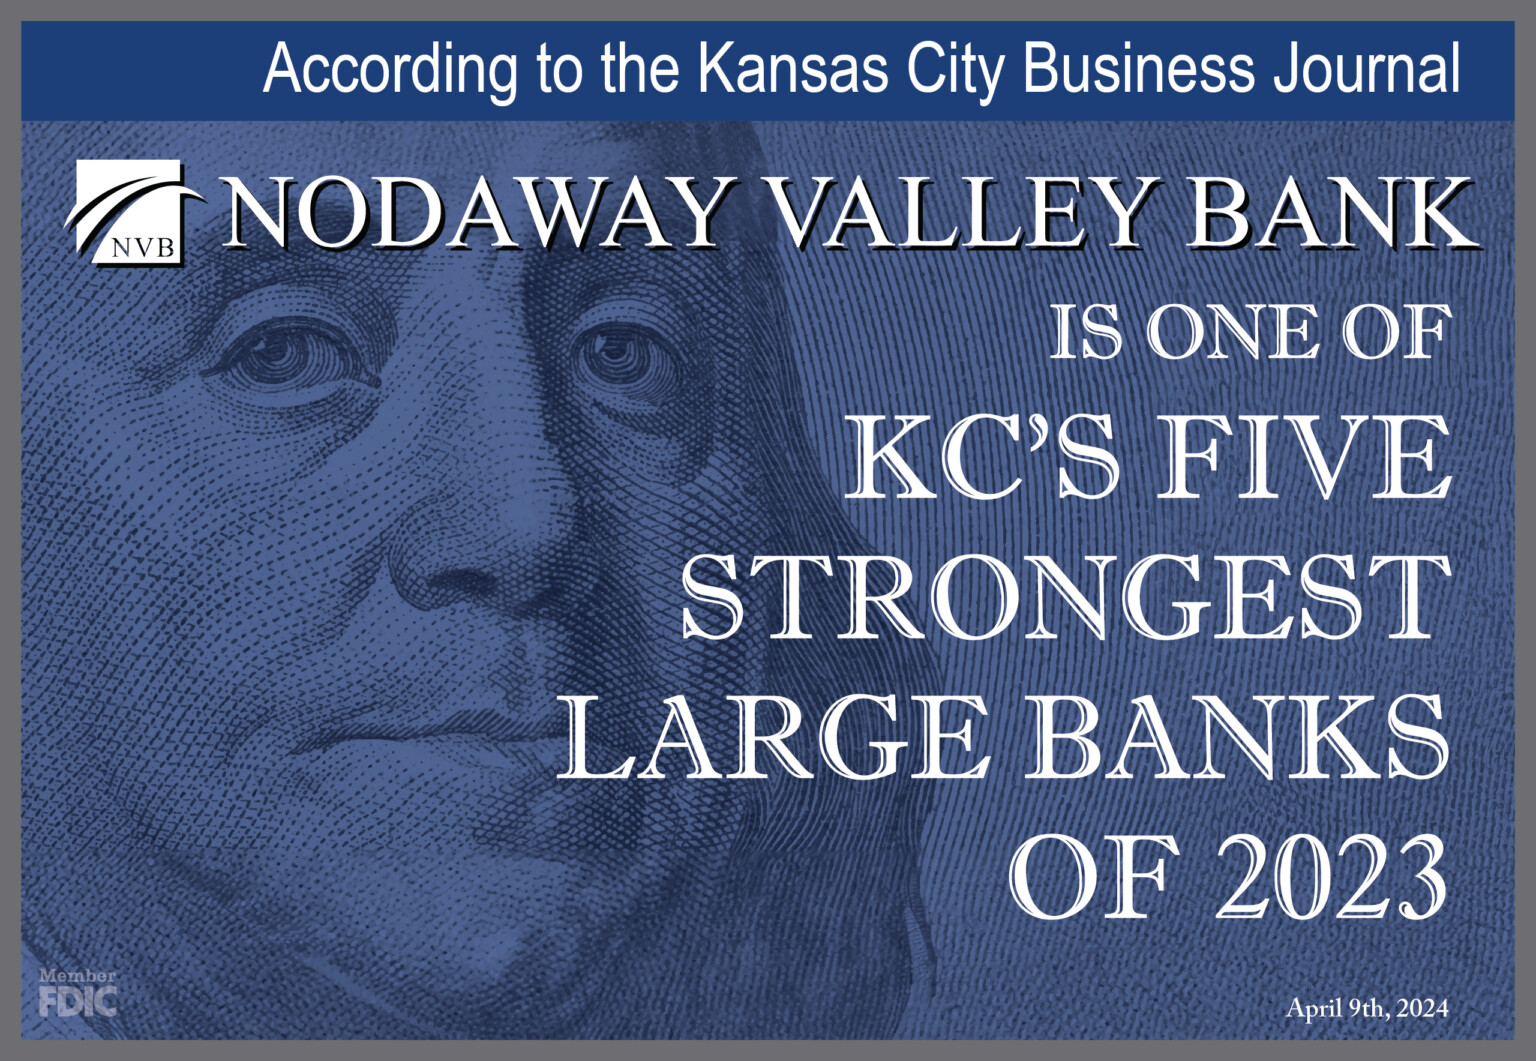 Nodaway Valley Bank Recognized As One Of The Five Strongest Large Banks In Kansas City